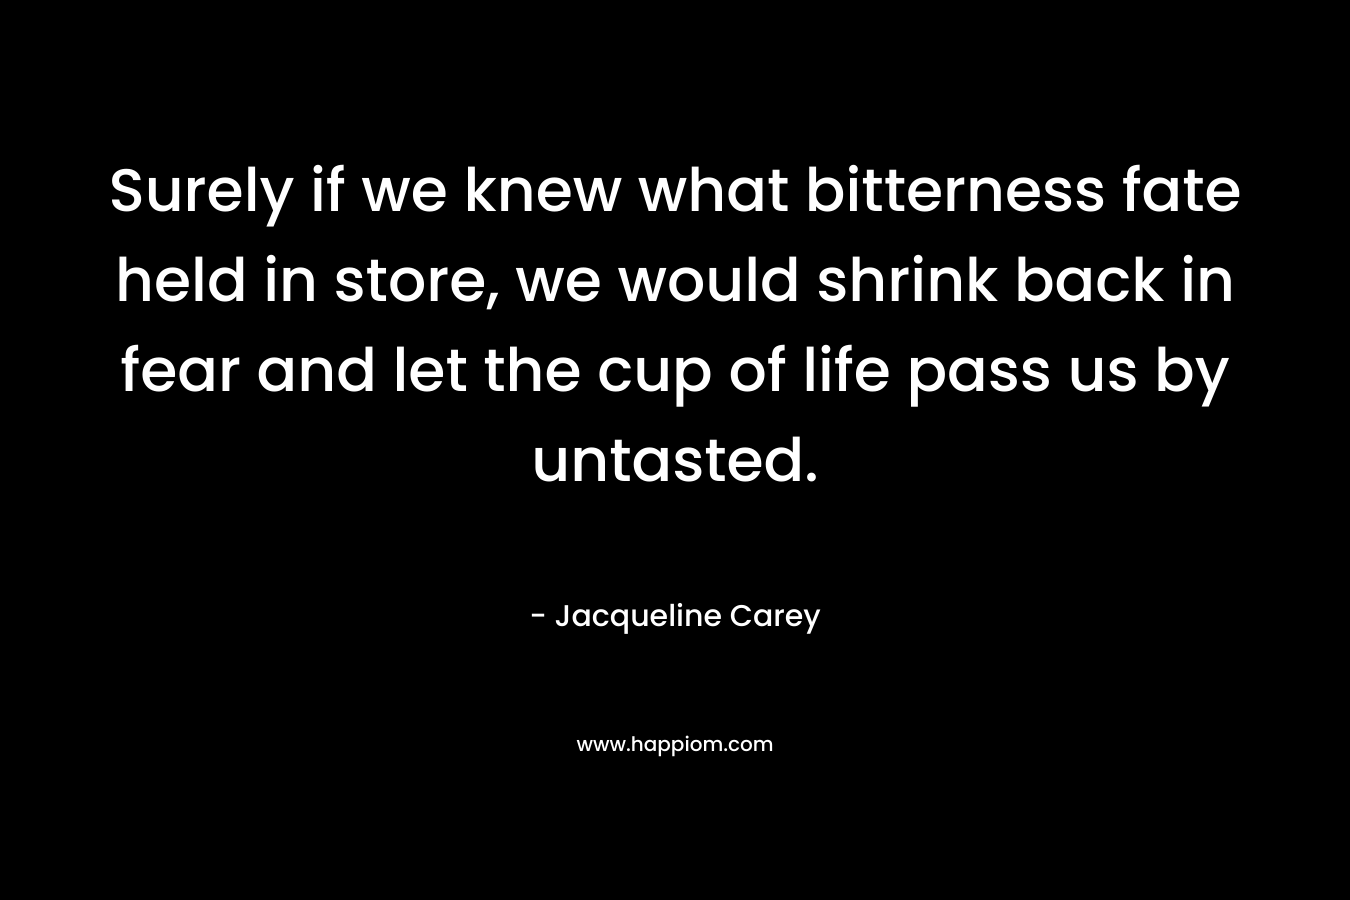 Surely if we knew what bitterness fate held in store, we would shrink back in fear and let the cup of life pass us by untasted. – Jacqueline Carey